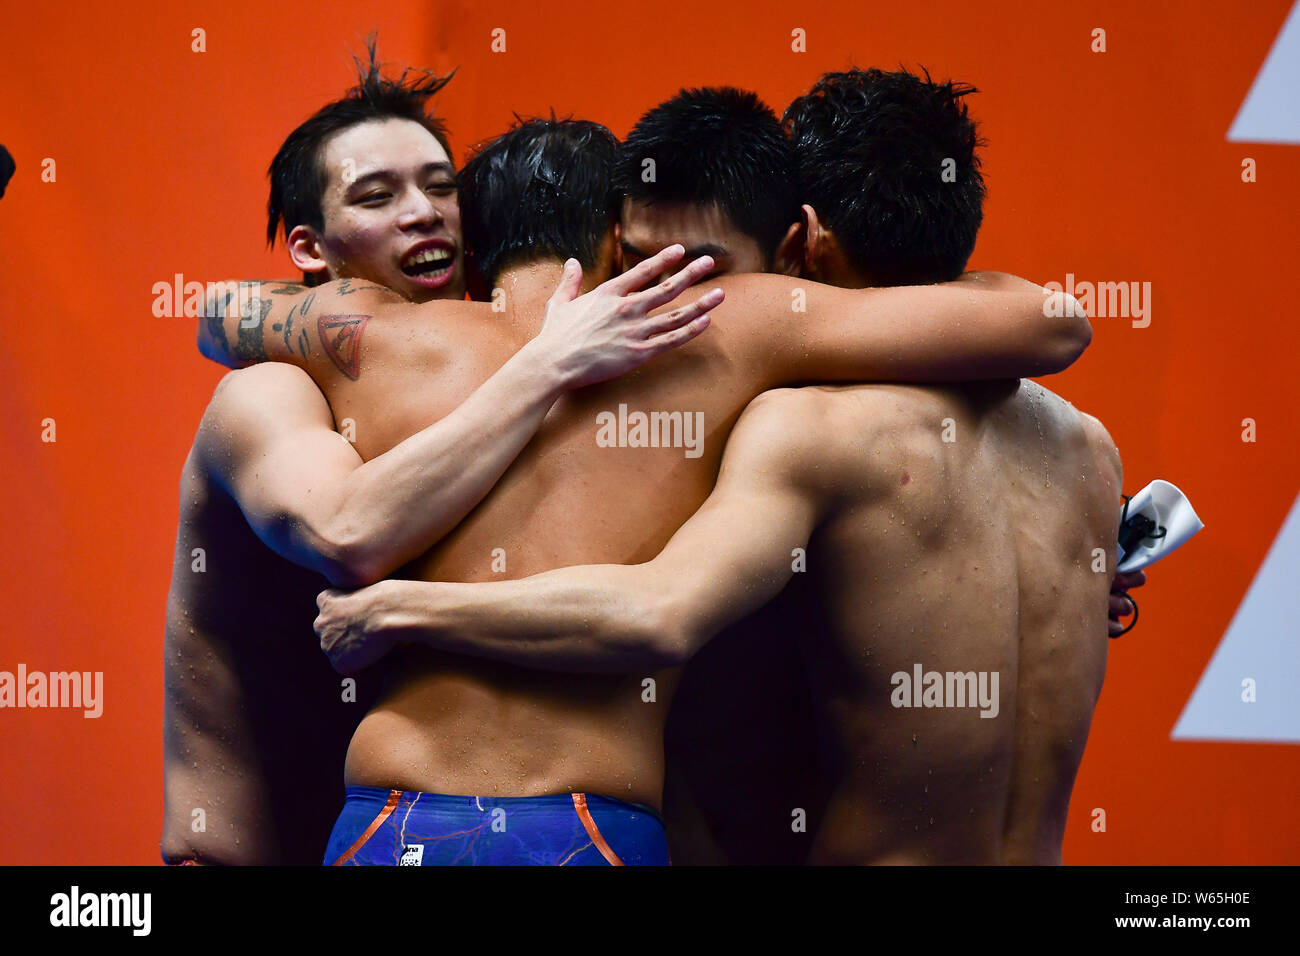 Chinese swimmers celebrate after winning the men's 4x100 medley relay swimming final during the 2018 Asian Games, officially known as the 18th Asian G Stock Photo